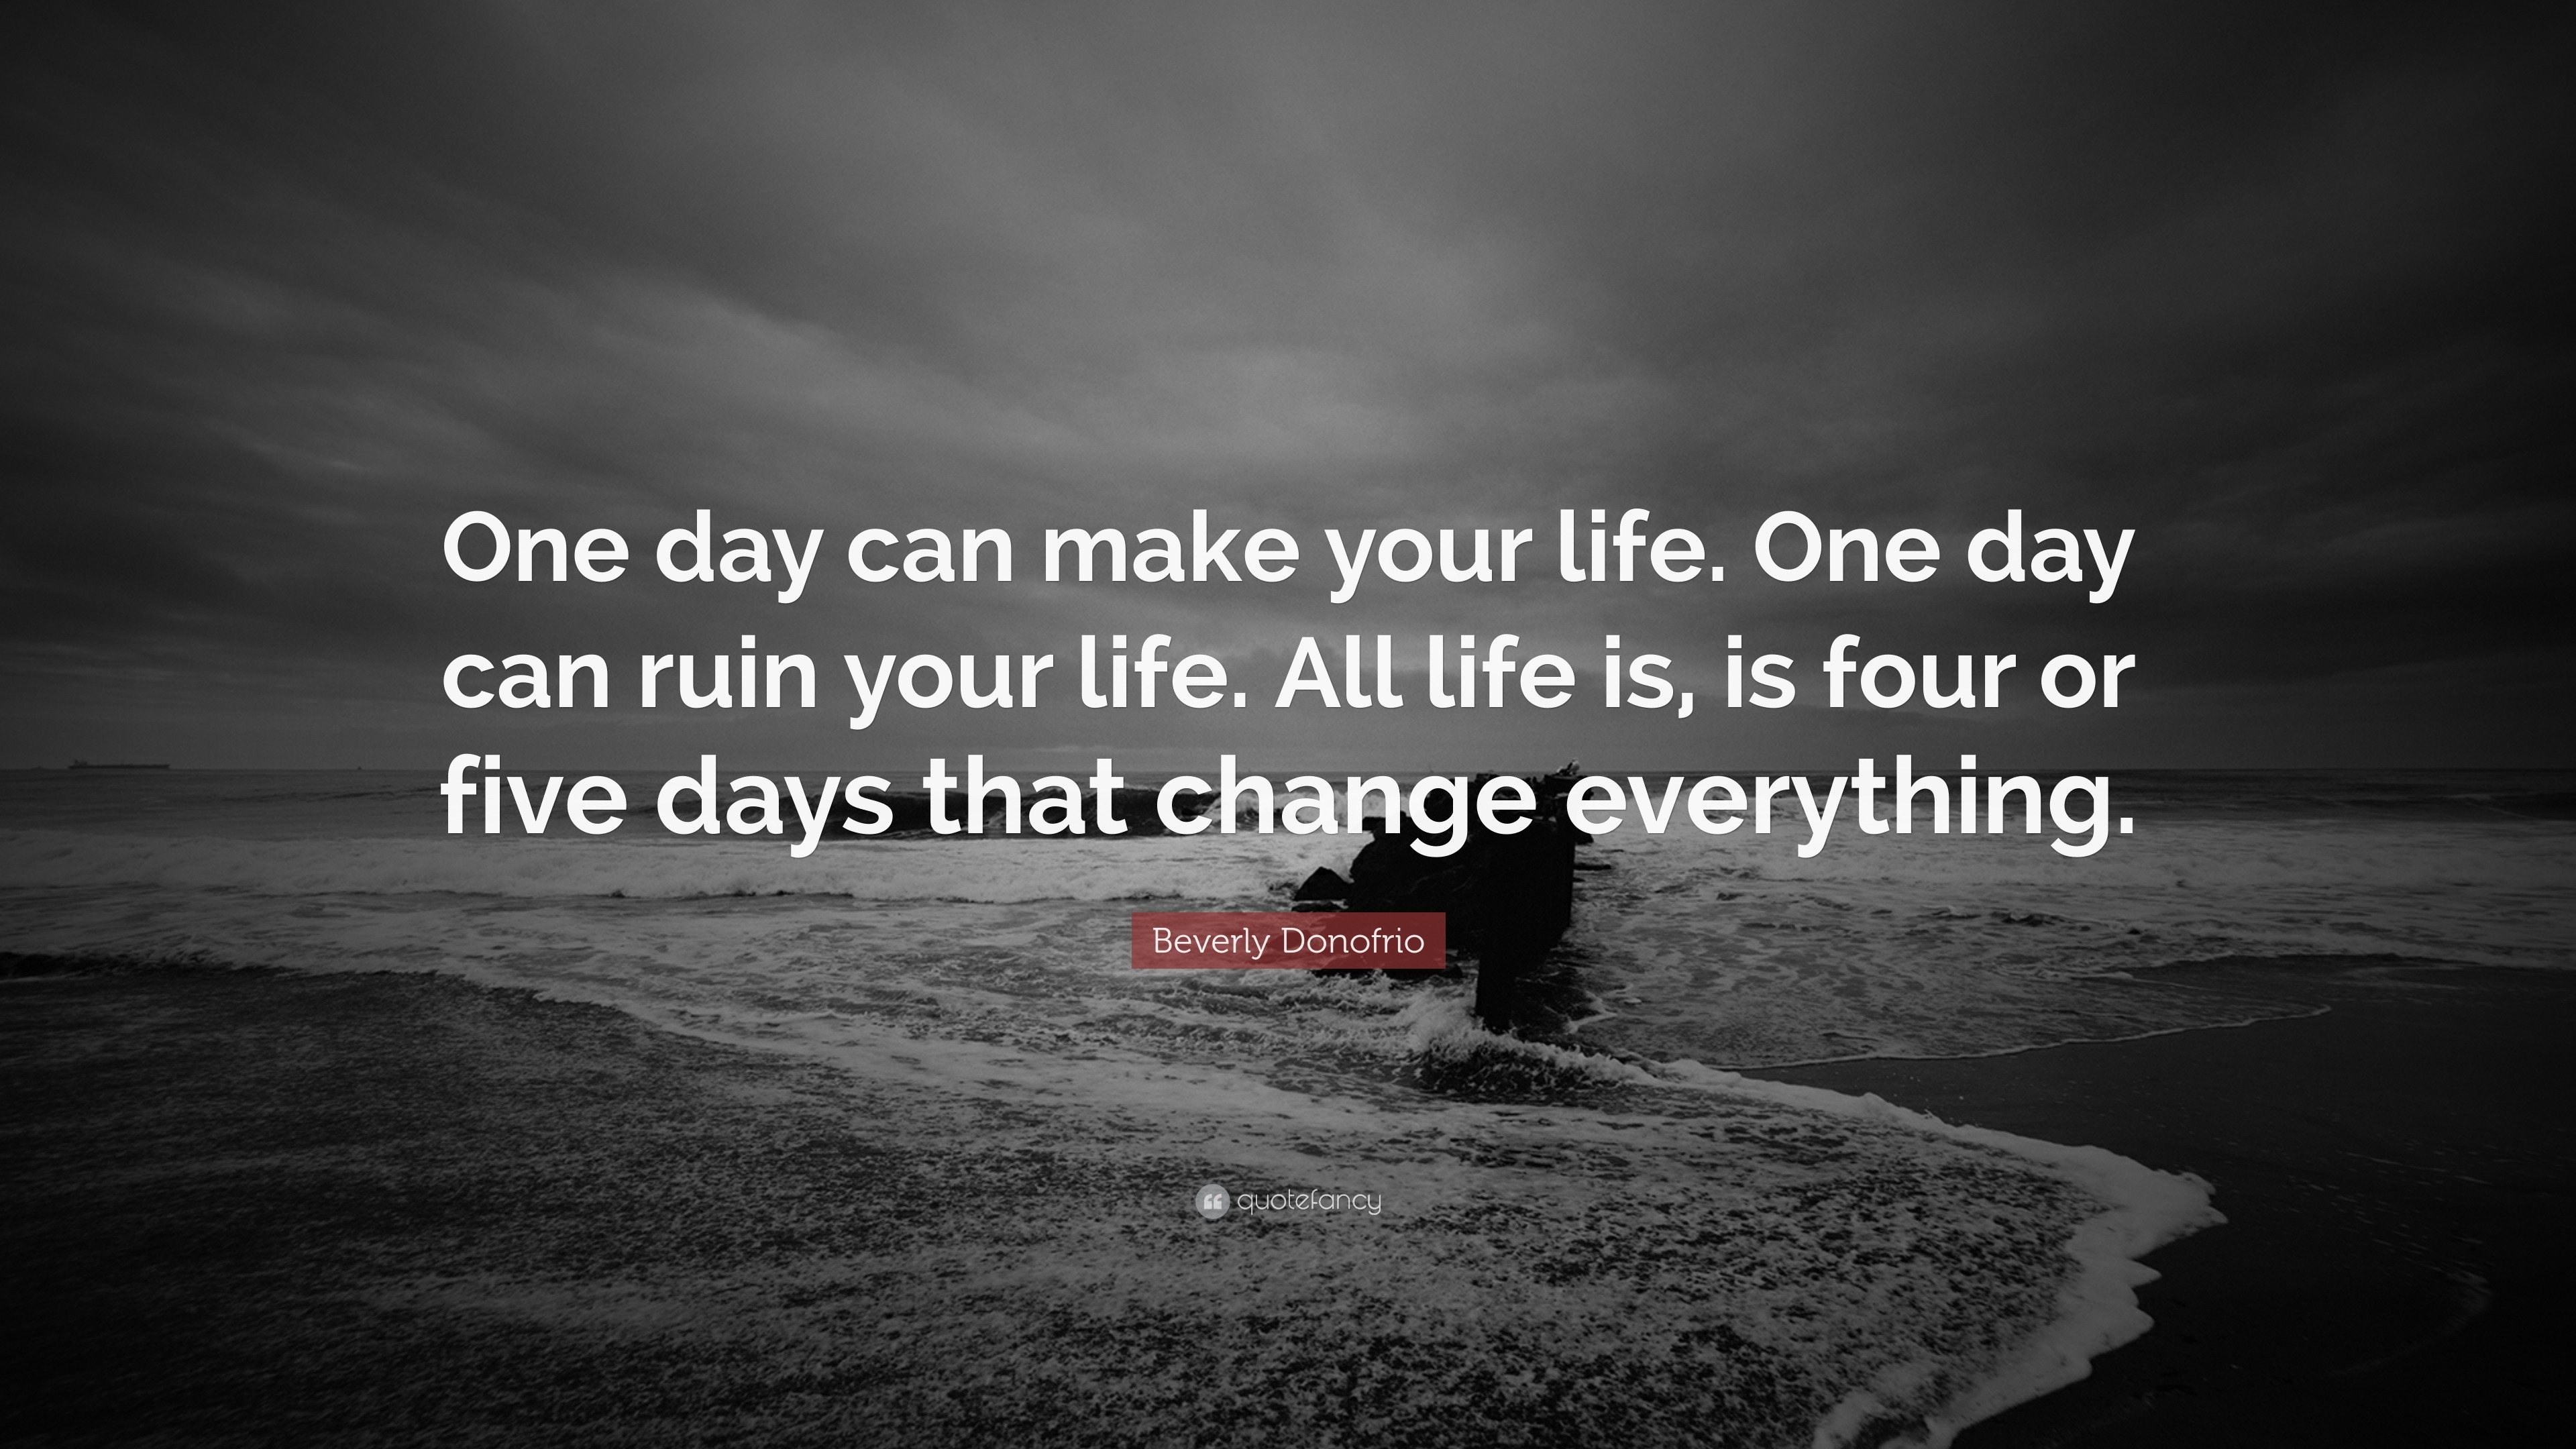 Beverly Donofrio Quote One Day Can Make Your Life One Day Can Ruin Your Life All Life Is Is Four Or Five Days That Change Everything 7 Wallpapers Quotefancy